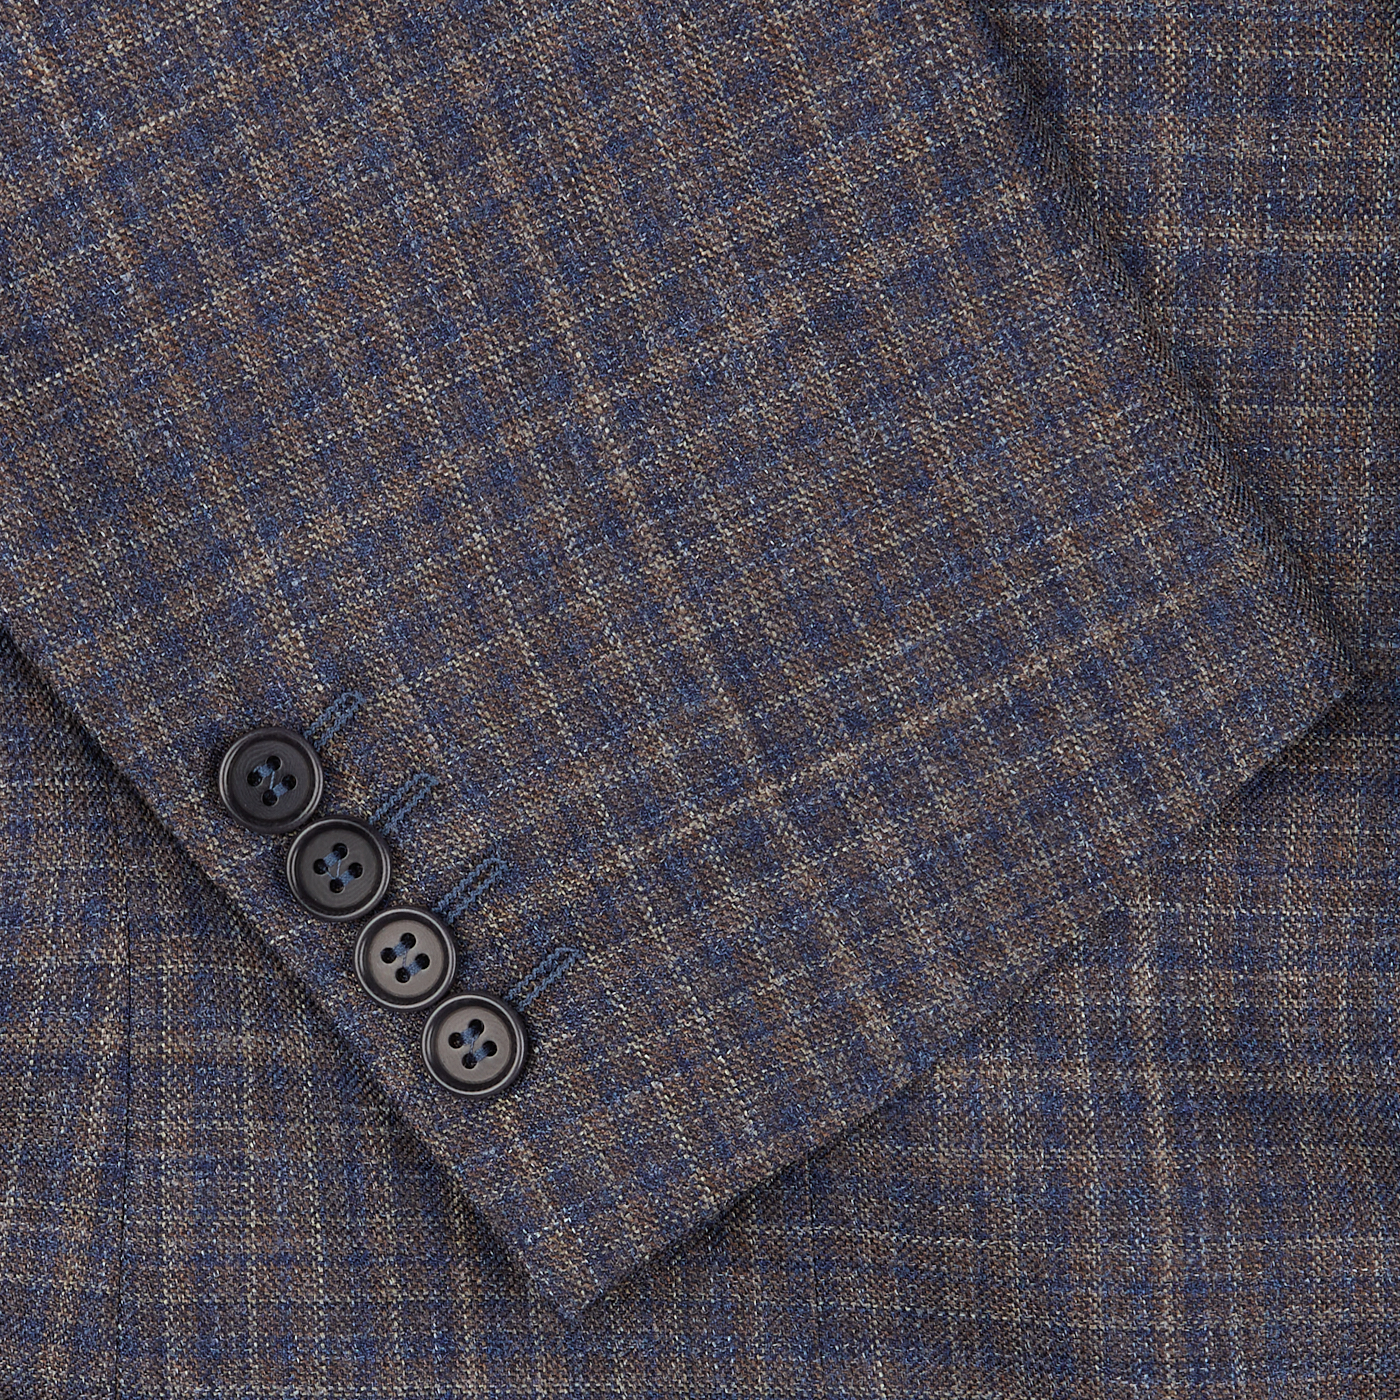 Close-up of a blue gingham checked Canali blazer fabric with a visible folded edge and four black buttons.